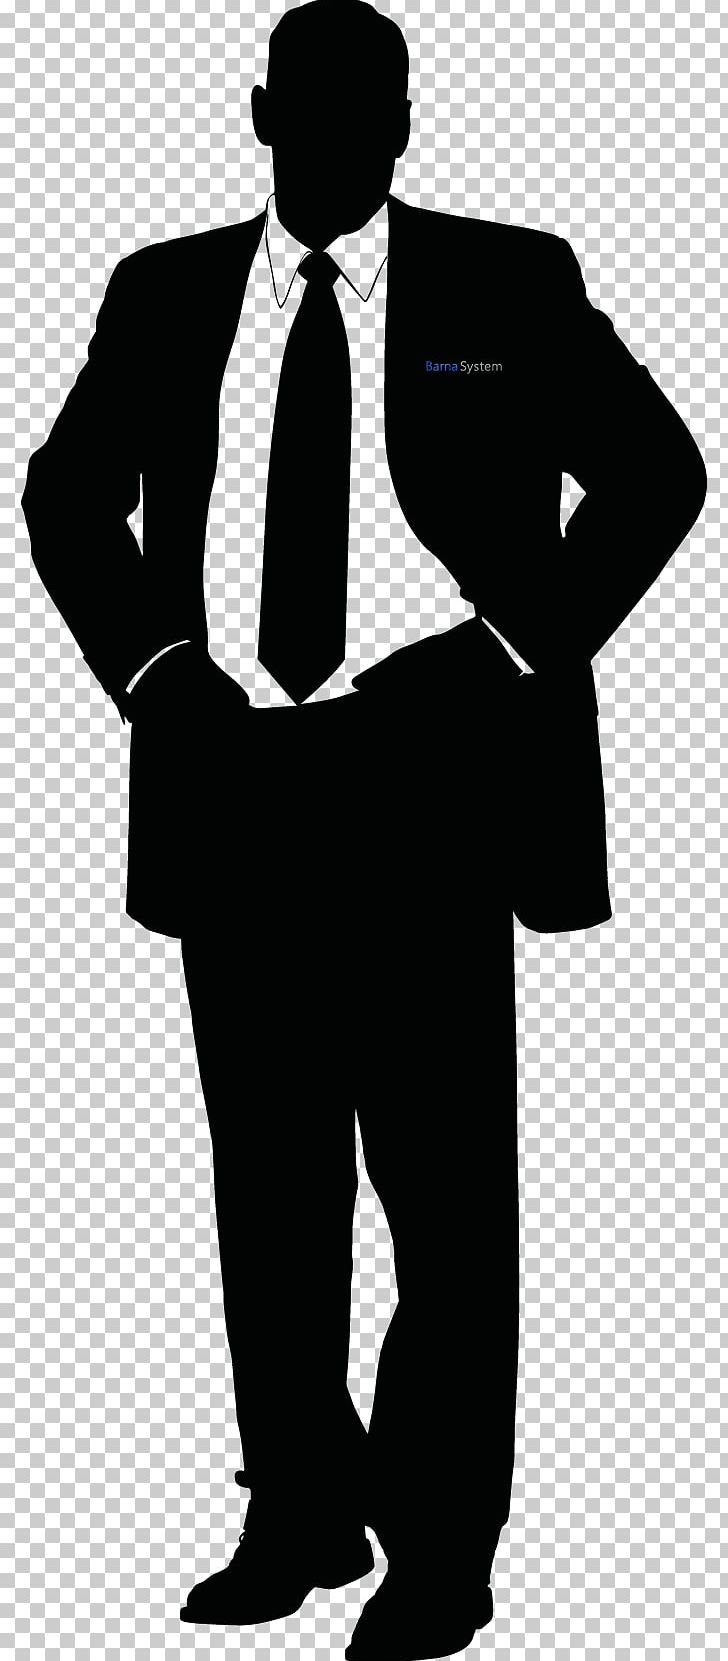 Business Turquality Corporation Consultant Management PNG, Clipart, Black And White, Business, Business Idea, Businessperson, Business Plan Free PNG Download